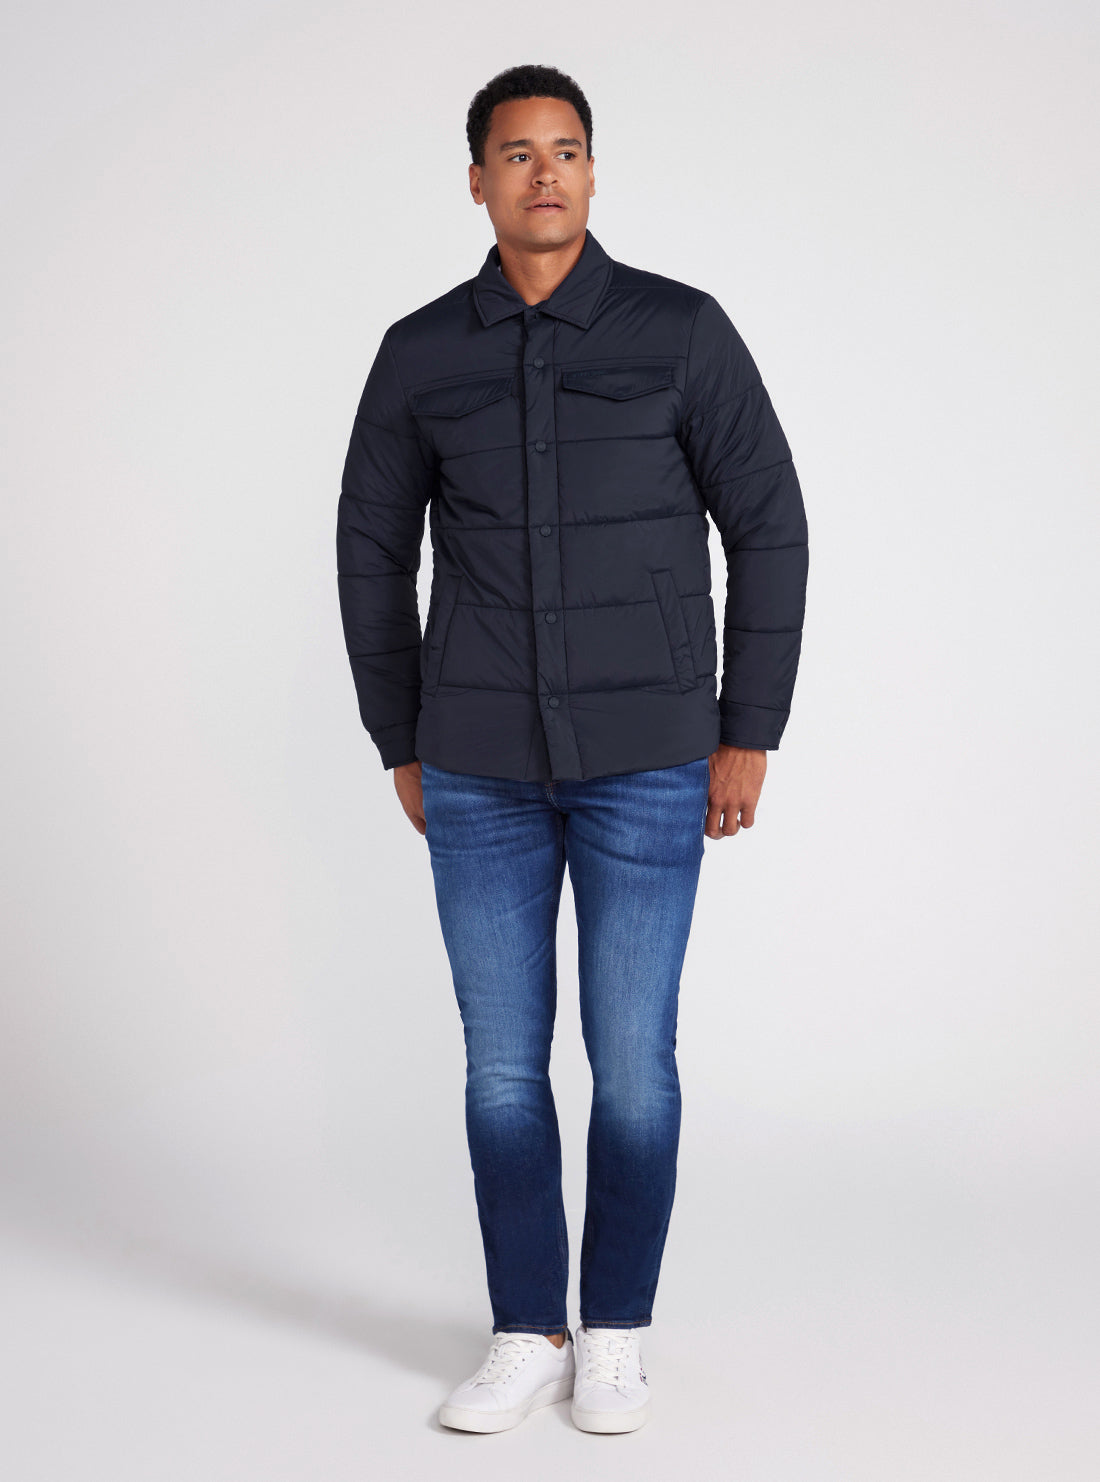 Eco Navy Blue Quilted Shacket | GUESS Men's Apparel | full view